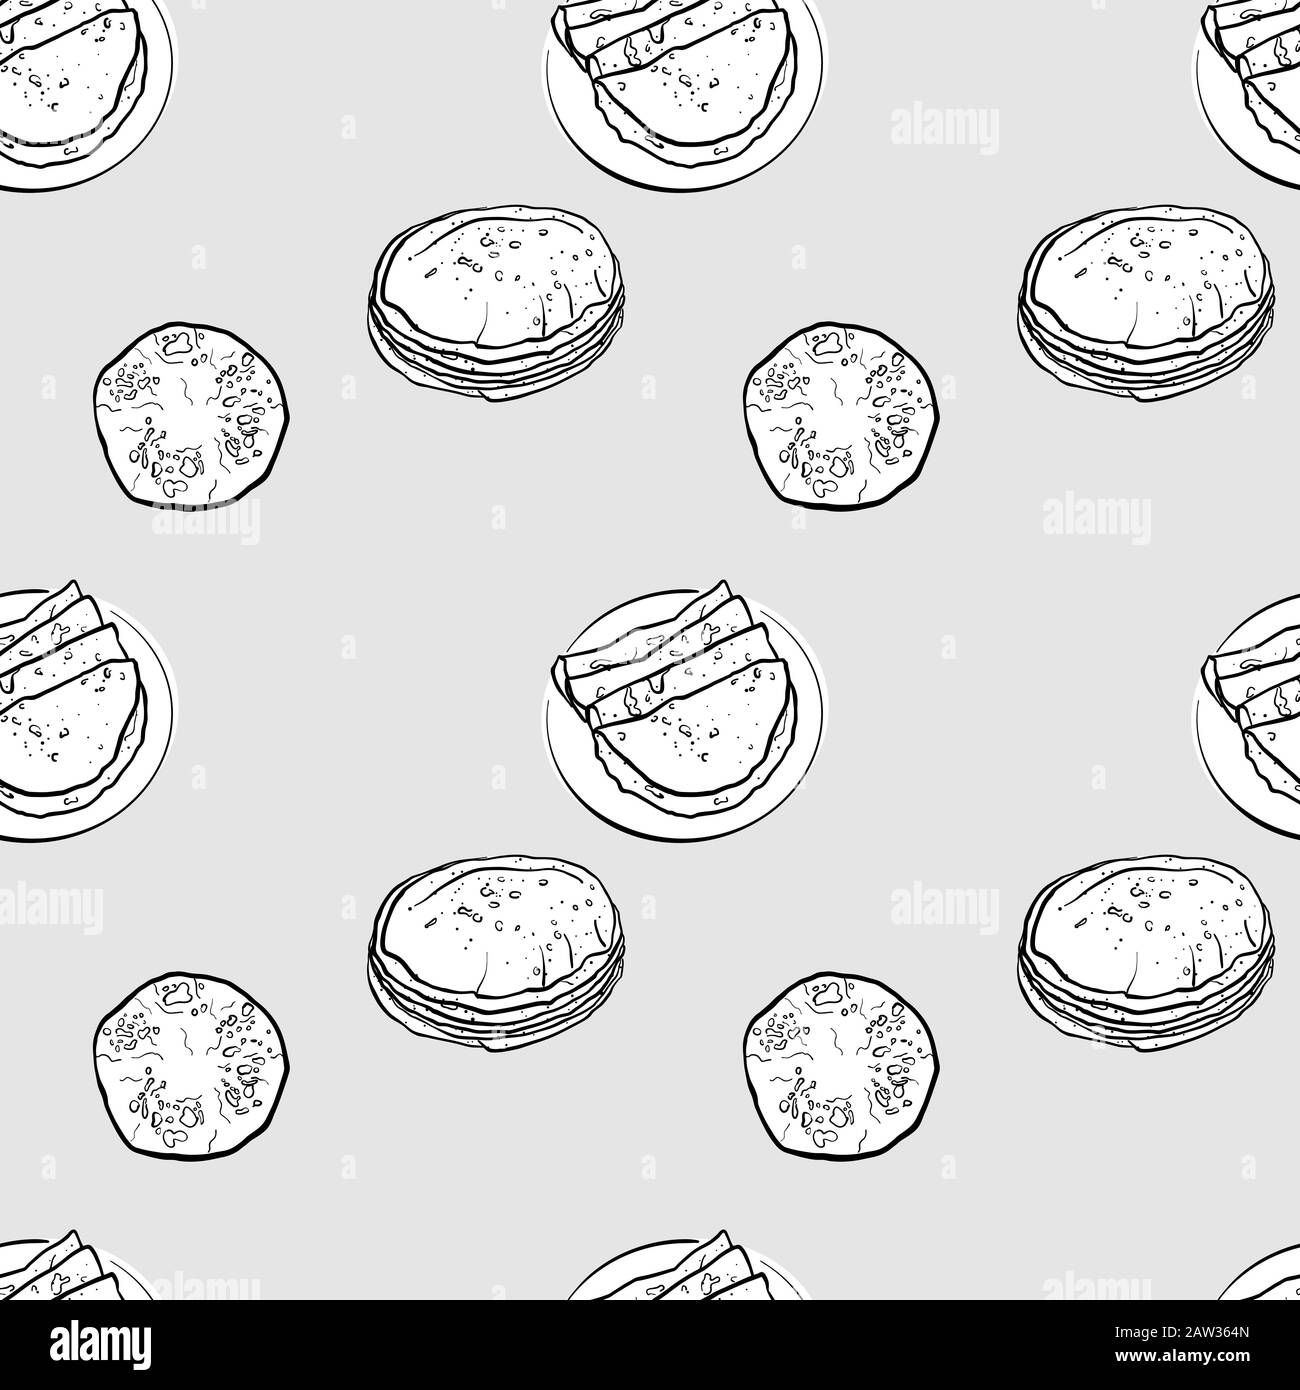 Shirmal food sketch separated on white vector drawing of flatbread  usually known in iran food illustration series  CanStock